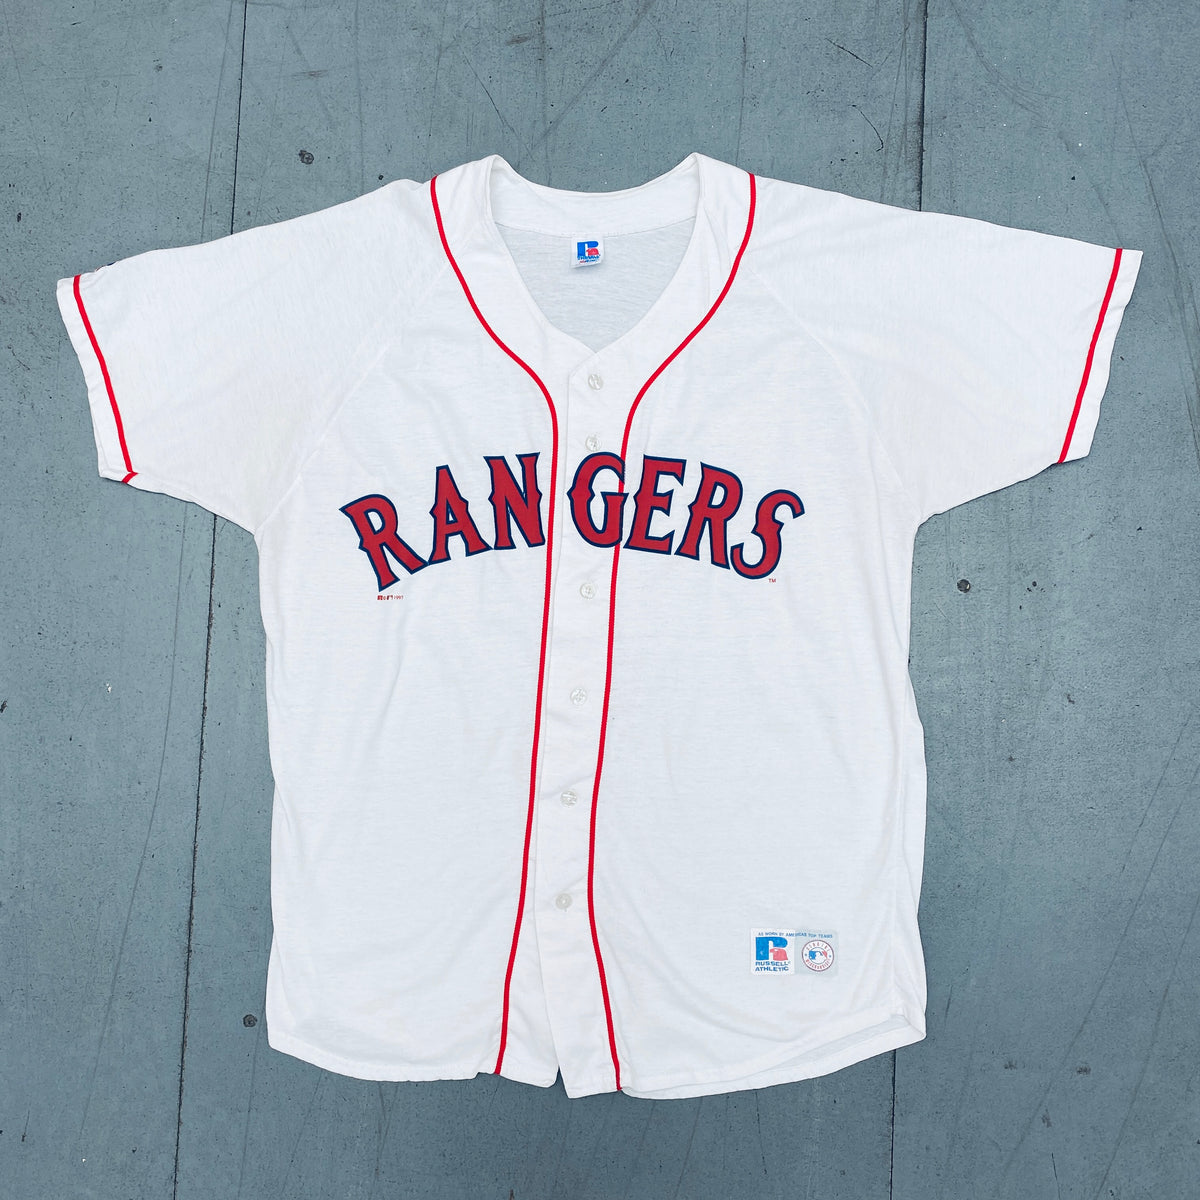 Texas Rangers: 1997 White Russell Athletic Home Jersey (XL